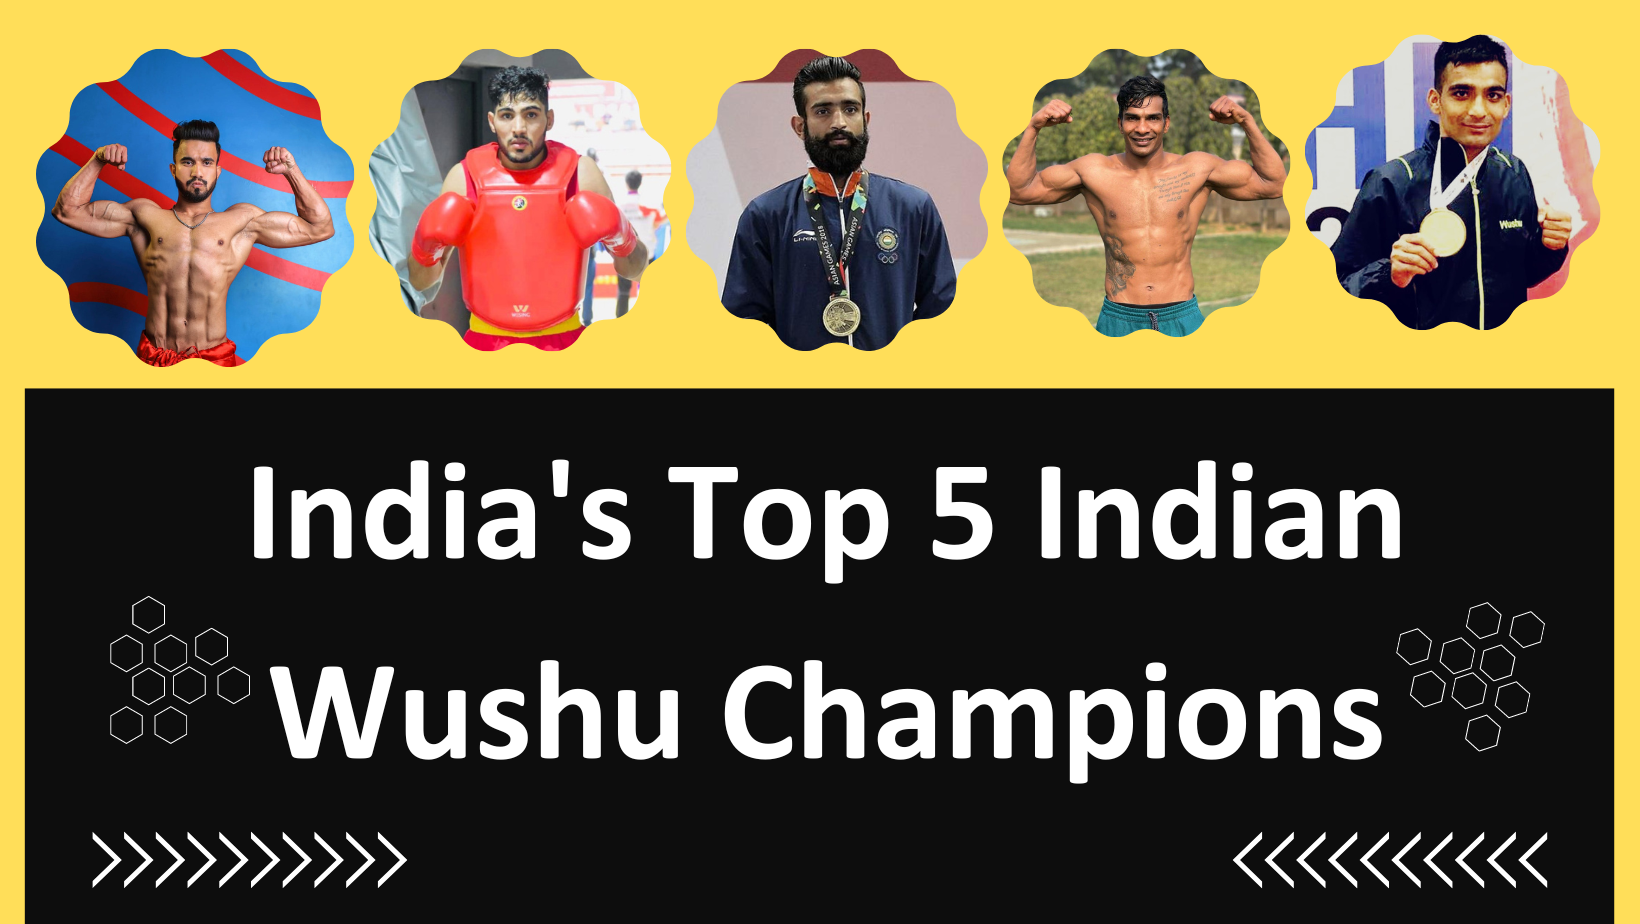 India's Top 5 Indian Wushu Champions